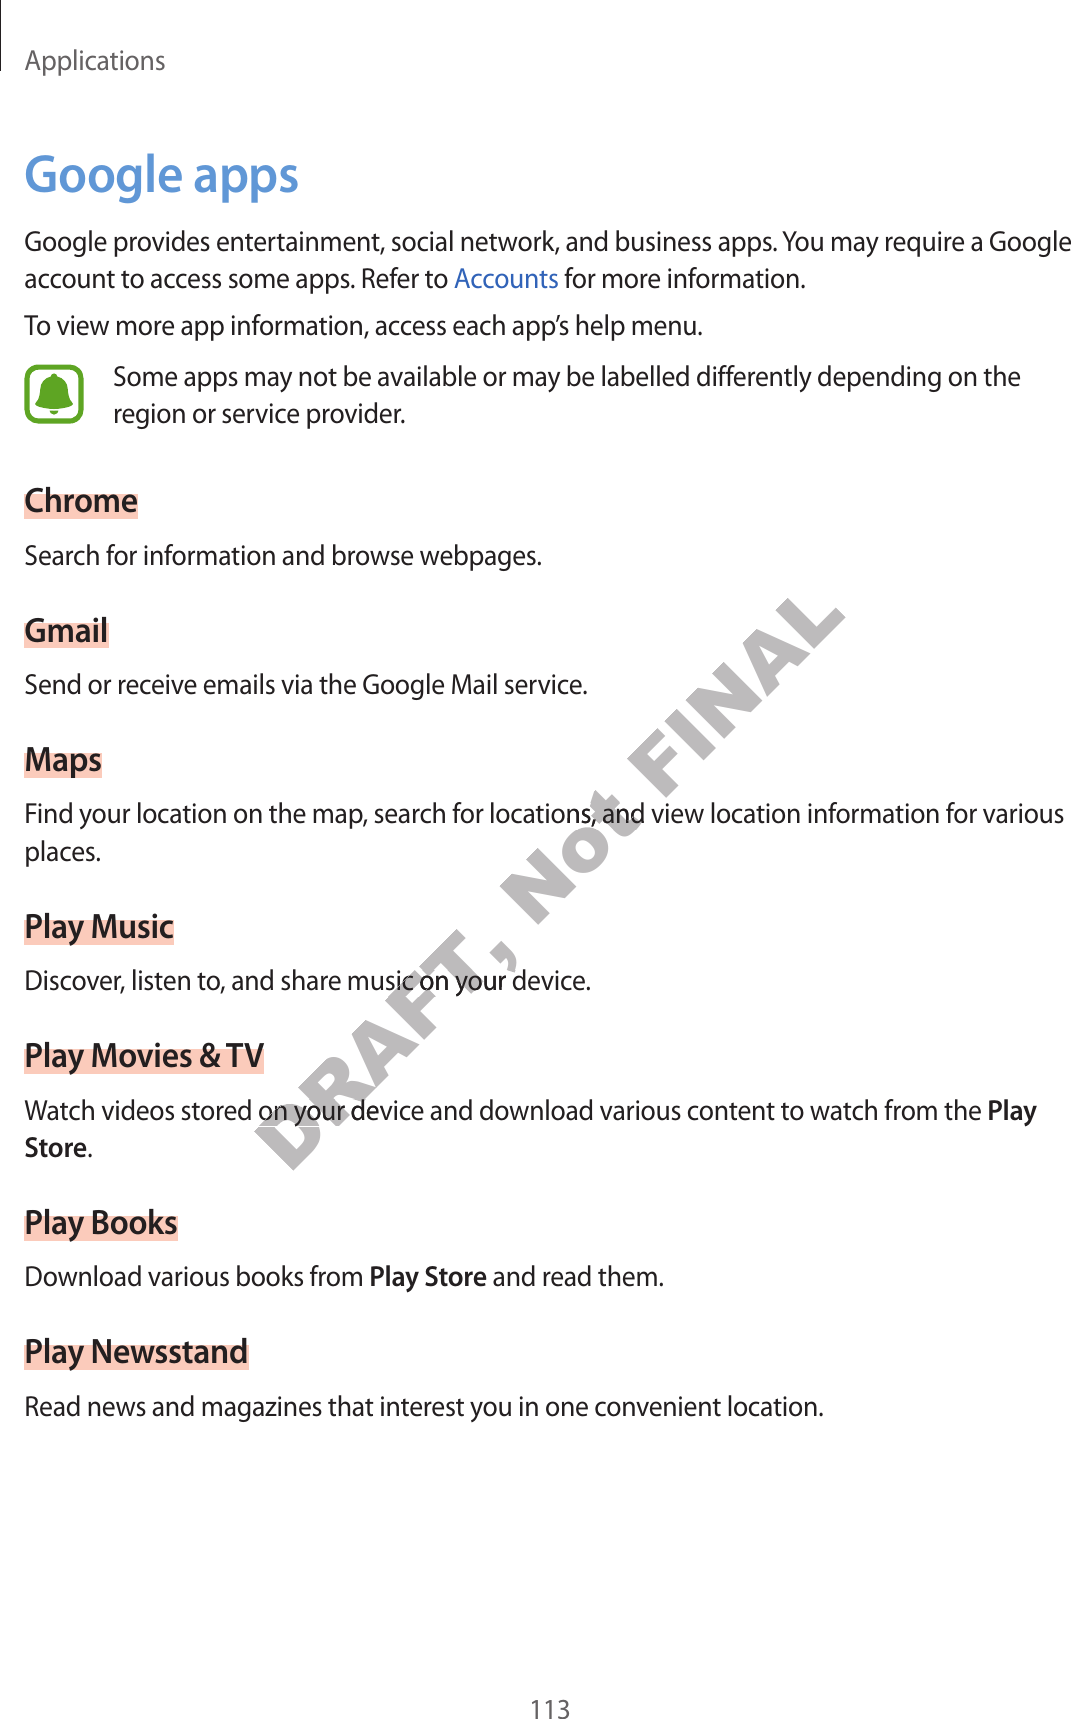 Applications113Google appsGoogle provides ent ertainment, social network, and business apps. You may requir e a Google account t o ac cess some apps . Ref er t o Accounts for mor e inf ormation.To view more app inf ormation, ac cess each app’s help menu.Some apps may not be available or ma y be labelled diff er en tly depending on the region or service provider.ChromeSearch for information and browse w ebpages .GmailSend or receiv e emails via the Google Mail service.MapsF ind y our loca tion on the map, search f or locations , and view location information for various places.Play MusicDiscov er, listen to, and share music on your devic e .Play Mo vies &amp; TVWatch videos stor ed on y our device and do wnload various c ont ent t o wat ch fr om the Play Store.Play BooksDownload various books from Play St or e and read them.Play Ne w sstandRead news and magazines that inter est y ou in one c on v enien t location.DRAFT, Discov er, listen to, and share music on your devic e .DRAFT, Discov er, listen to, and share music on your devic e .DRAFT, Watch videos stor ed on y our device and do wnload various c ont ent t o wat ch fr om the DRAFT, Watch videos stor ed on y our device and do wnload various c ont ent t o wat ch fr om the Not F ind y our loca tion on the map, search f or locations , and view location information for various Not F ind y our loca tion on the map, search f or locations , and view location information for various FINAL